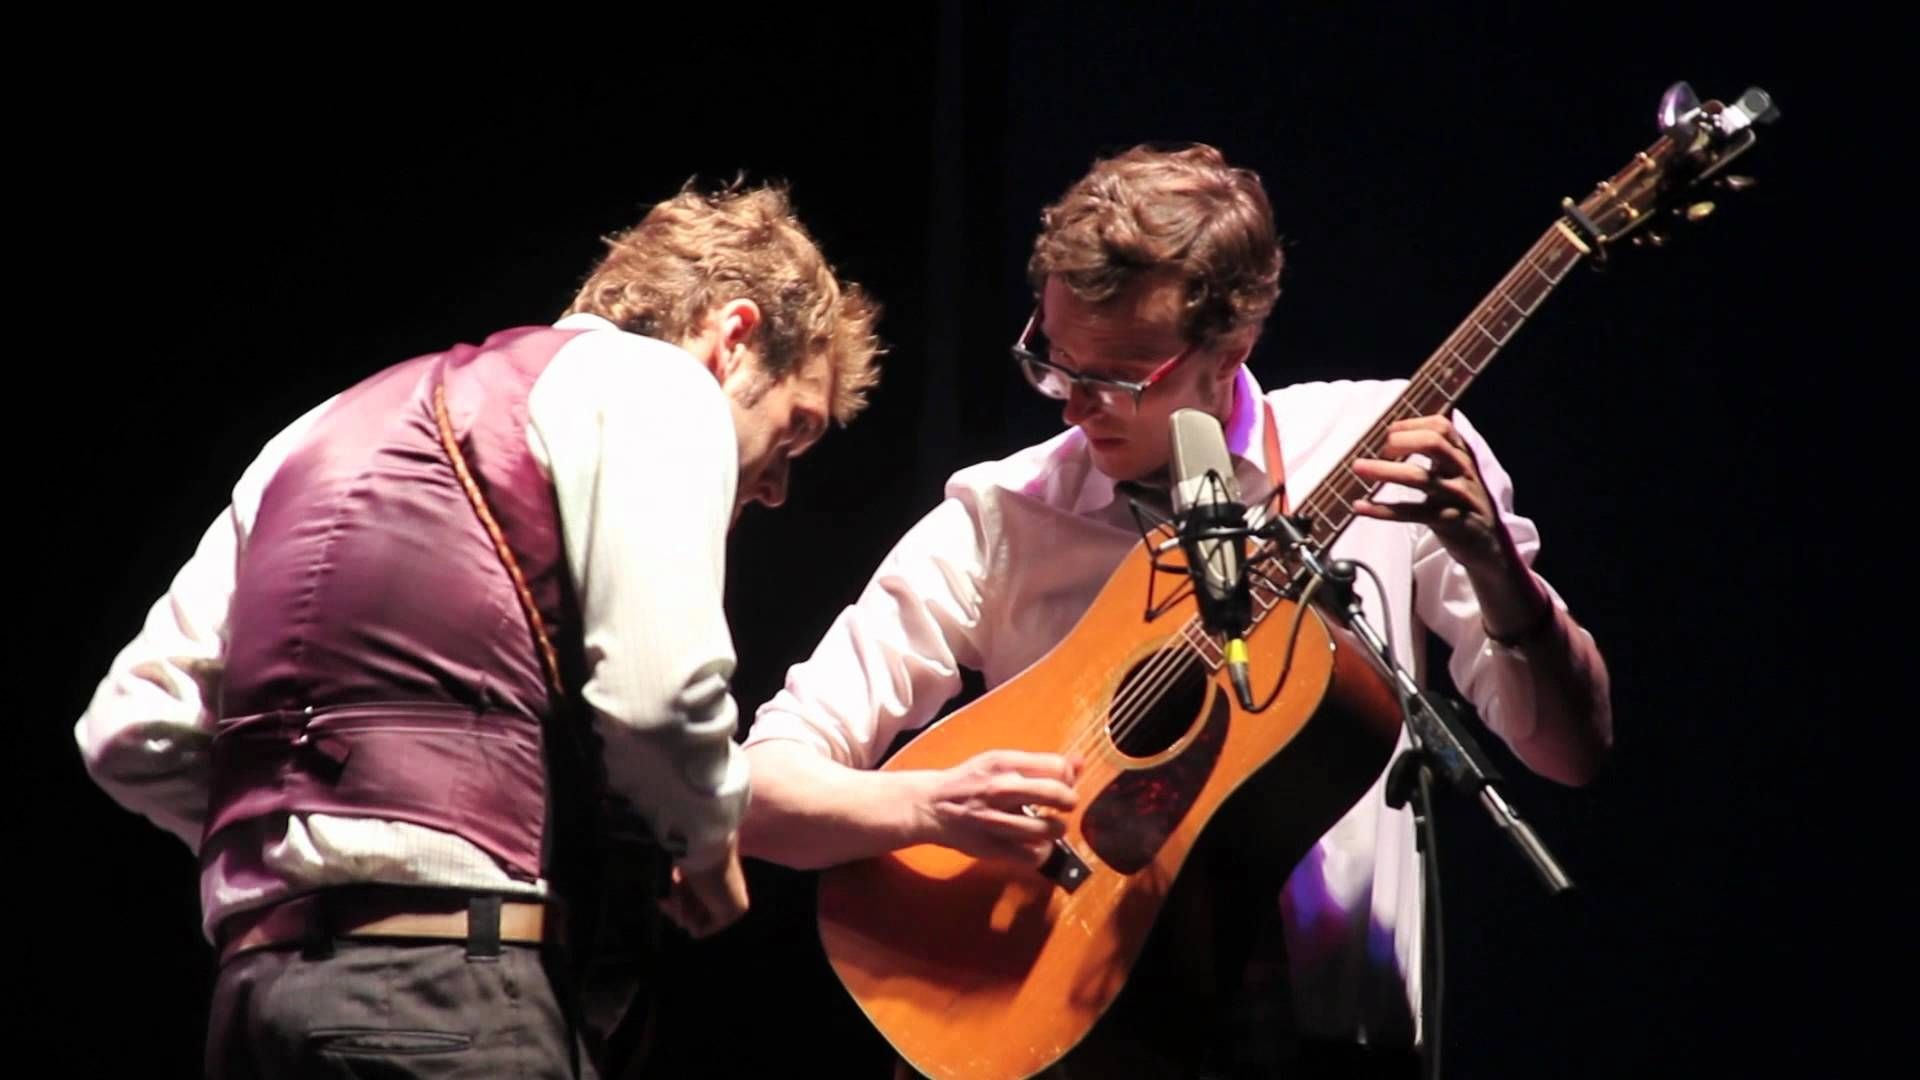 1920x1080 Chris Thile & Michael Daves--Fiddle Tune Request Time Chris Thile, Bluegrass  Music